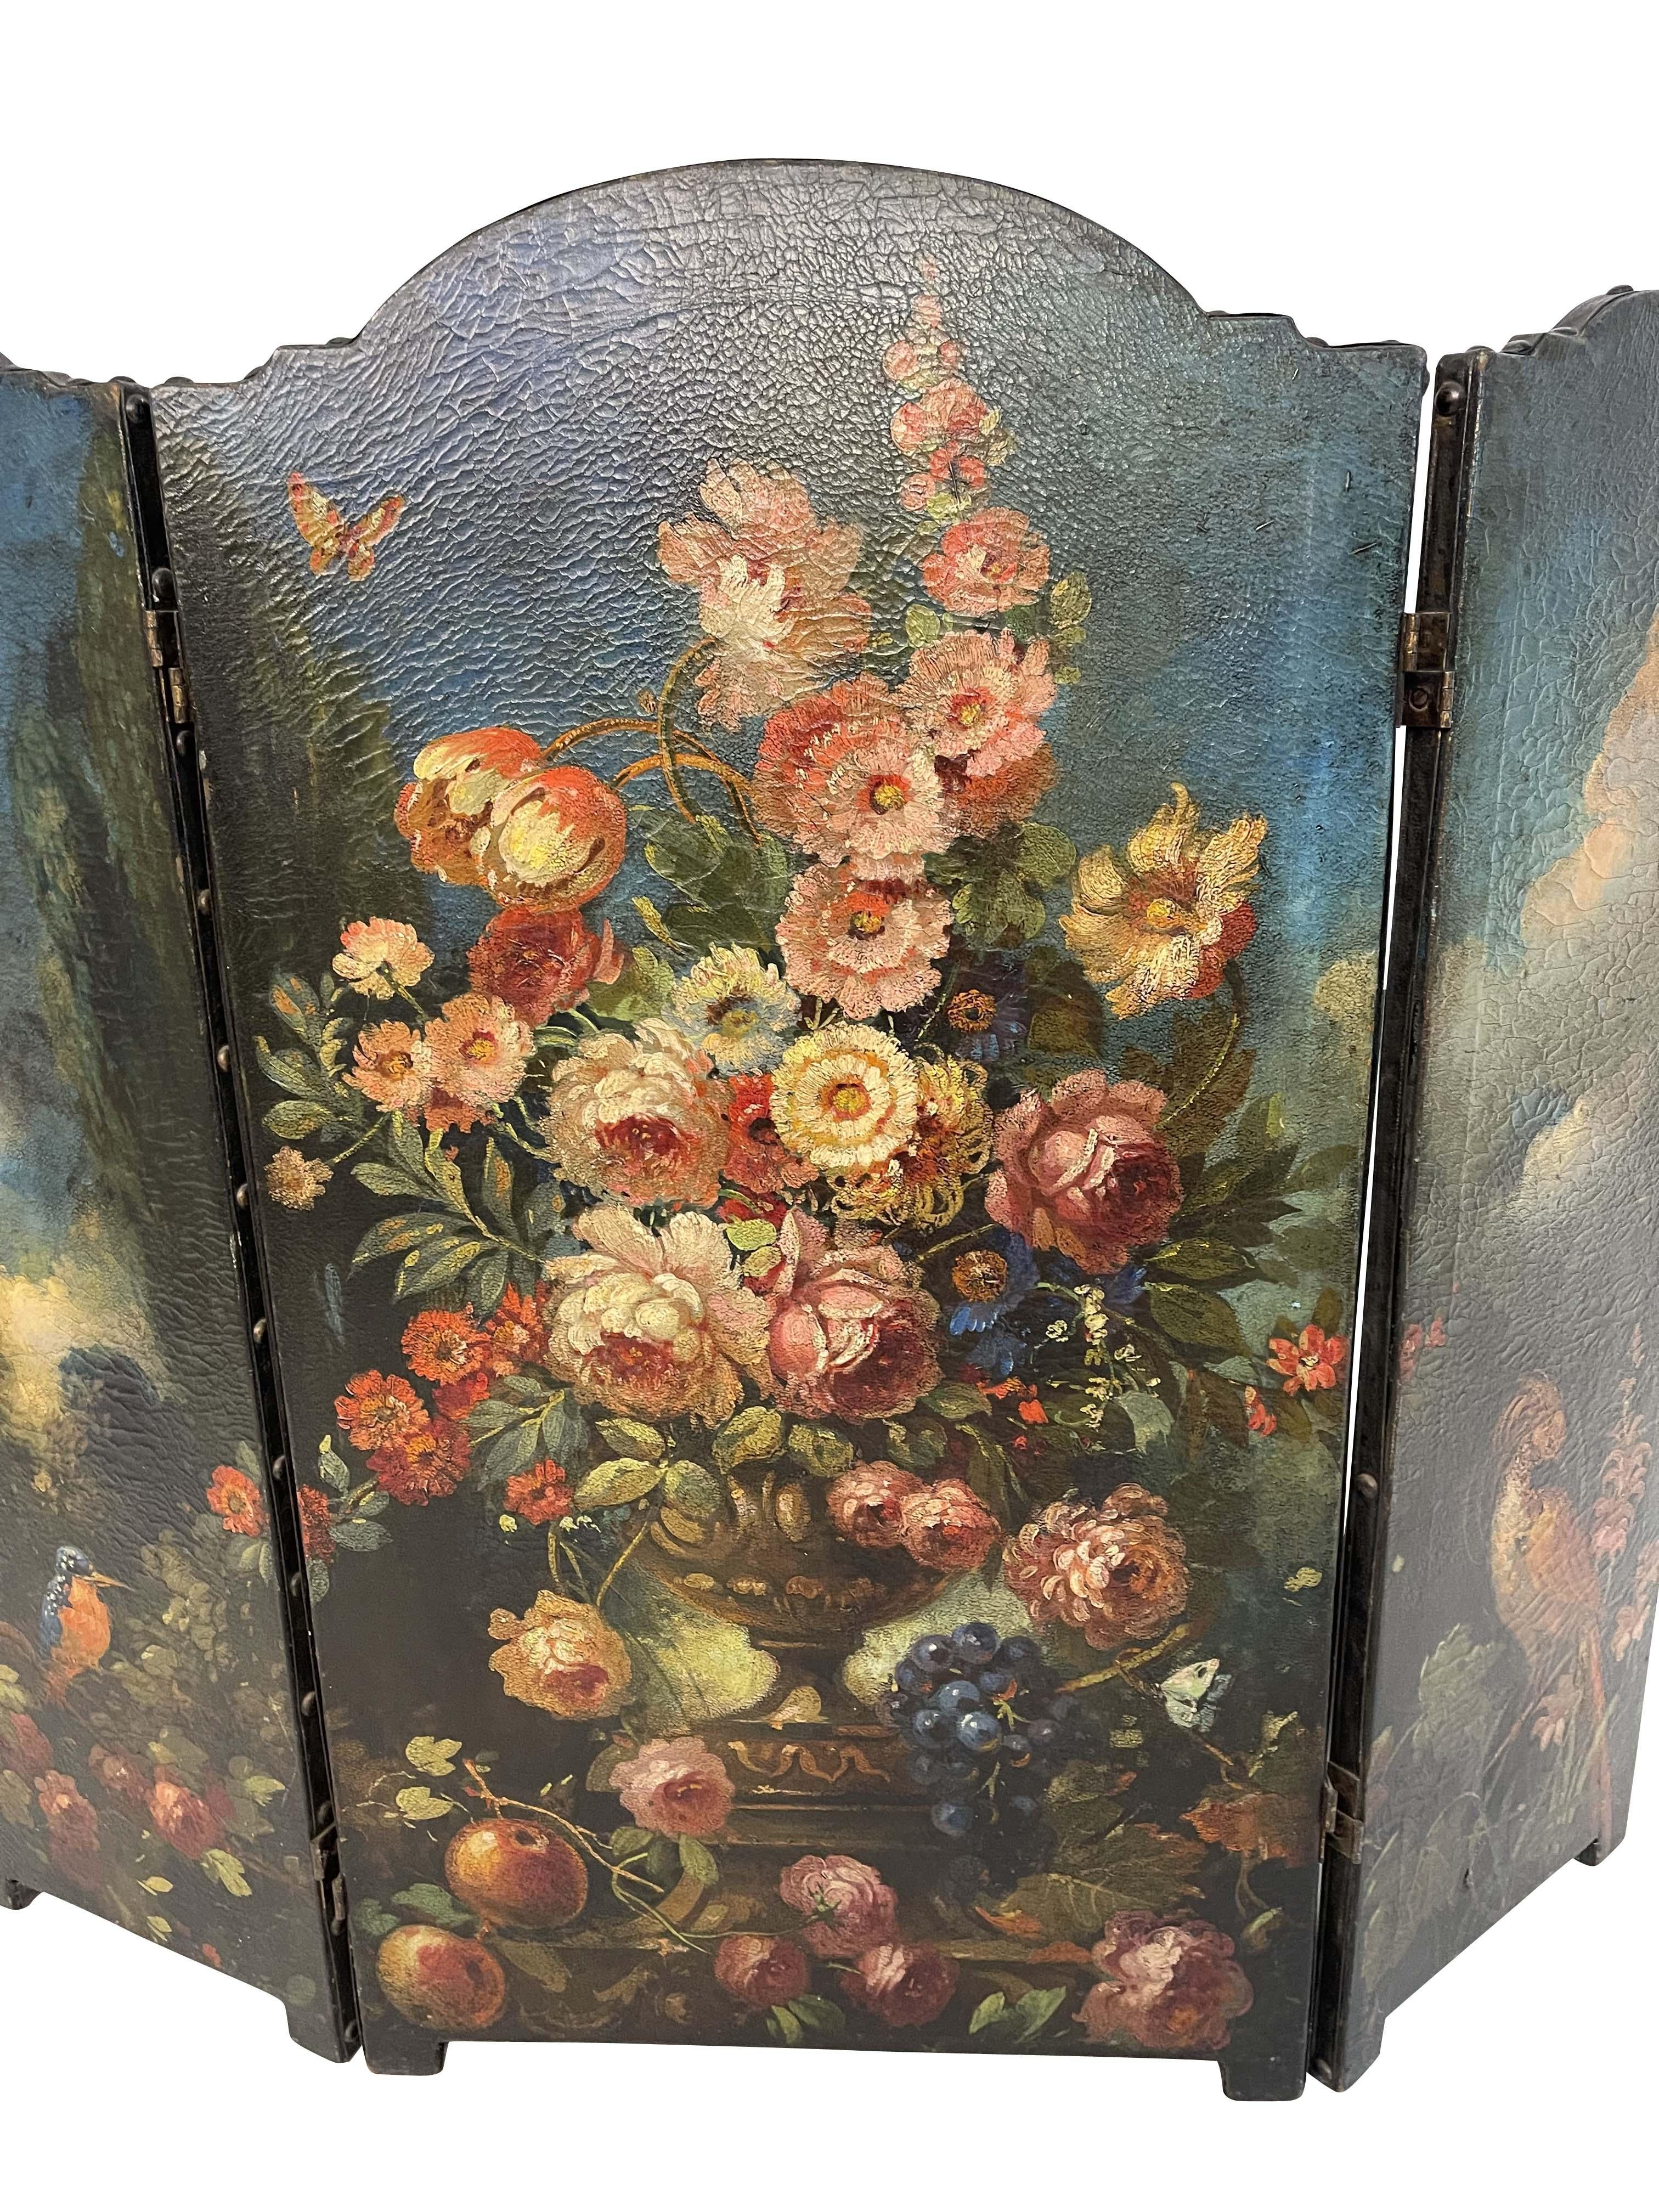 Hand-Crafted Antique Hand-Painted Floral Leather Fire Screen